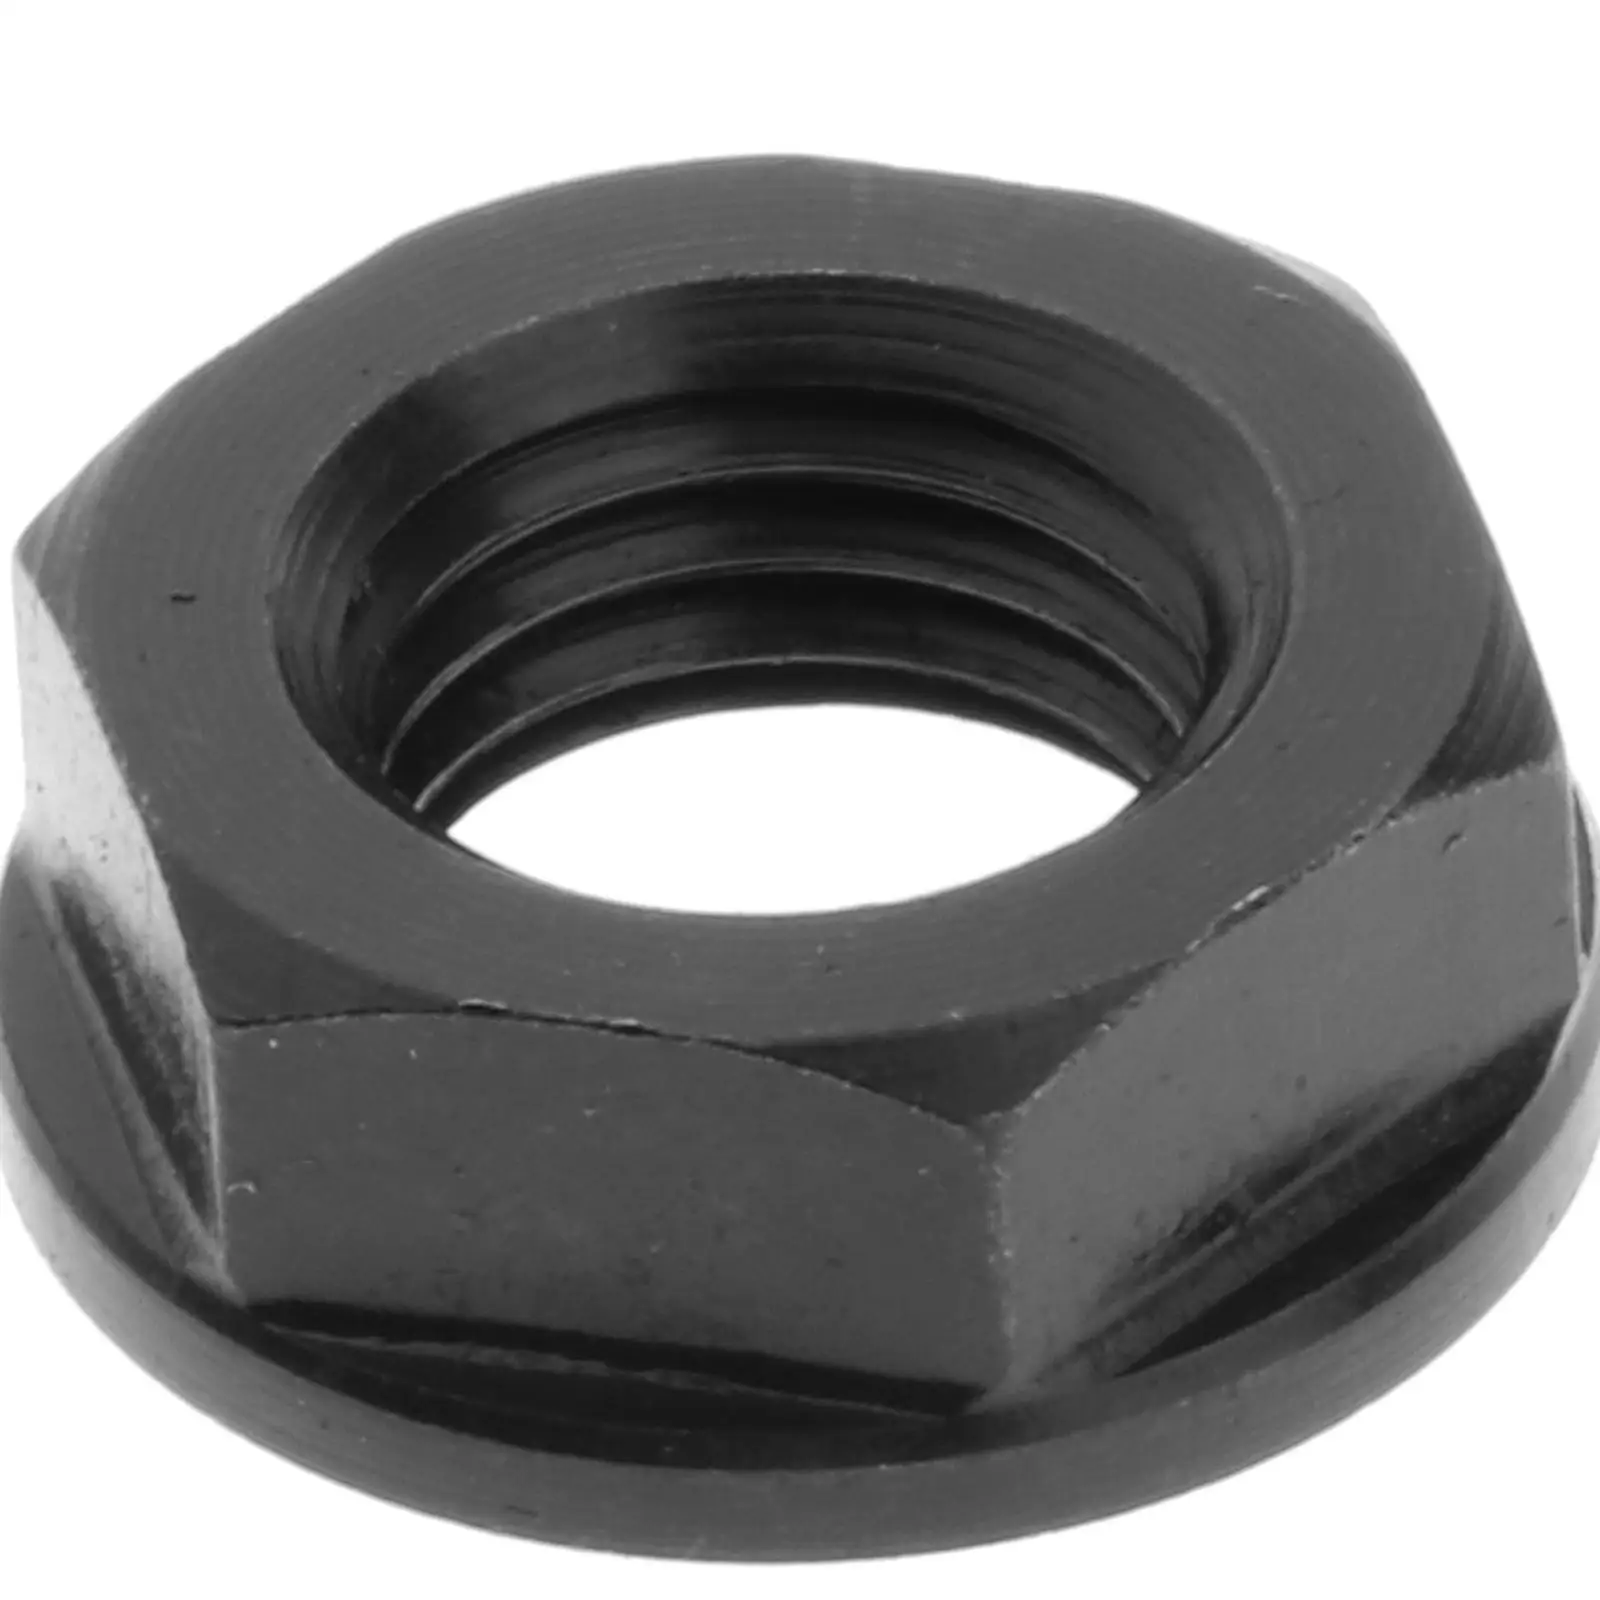 90179-08M06 Driver Shaft Nut for Yamaha Outboard Parts 8 9.9 15 20HP Parsun Hidea  Motocycle Accessory Replacements